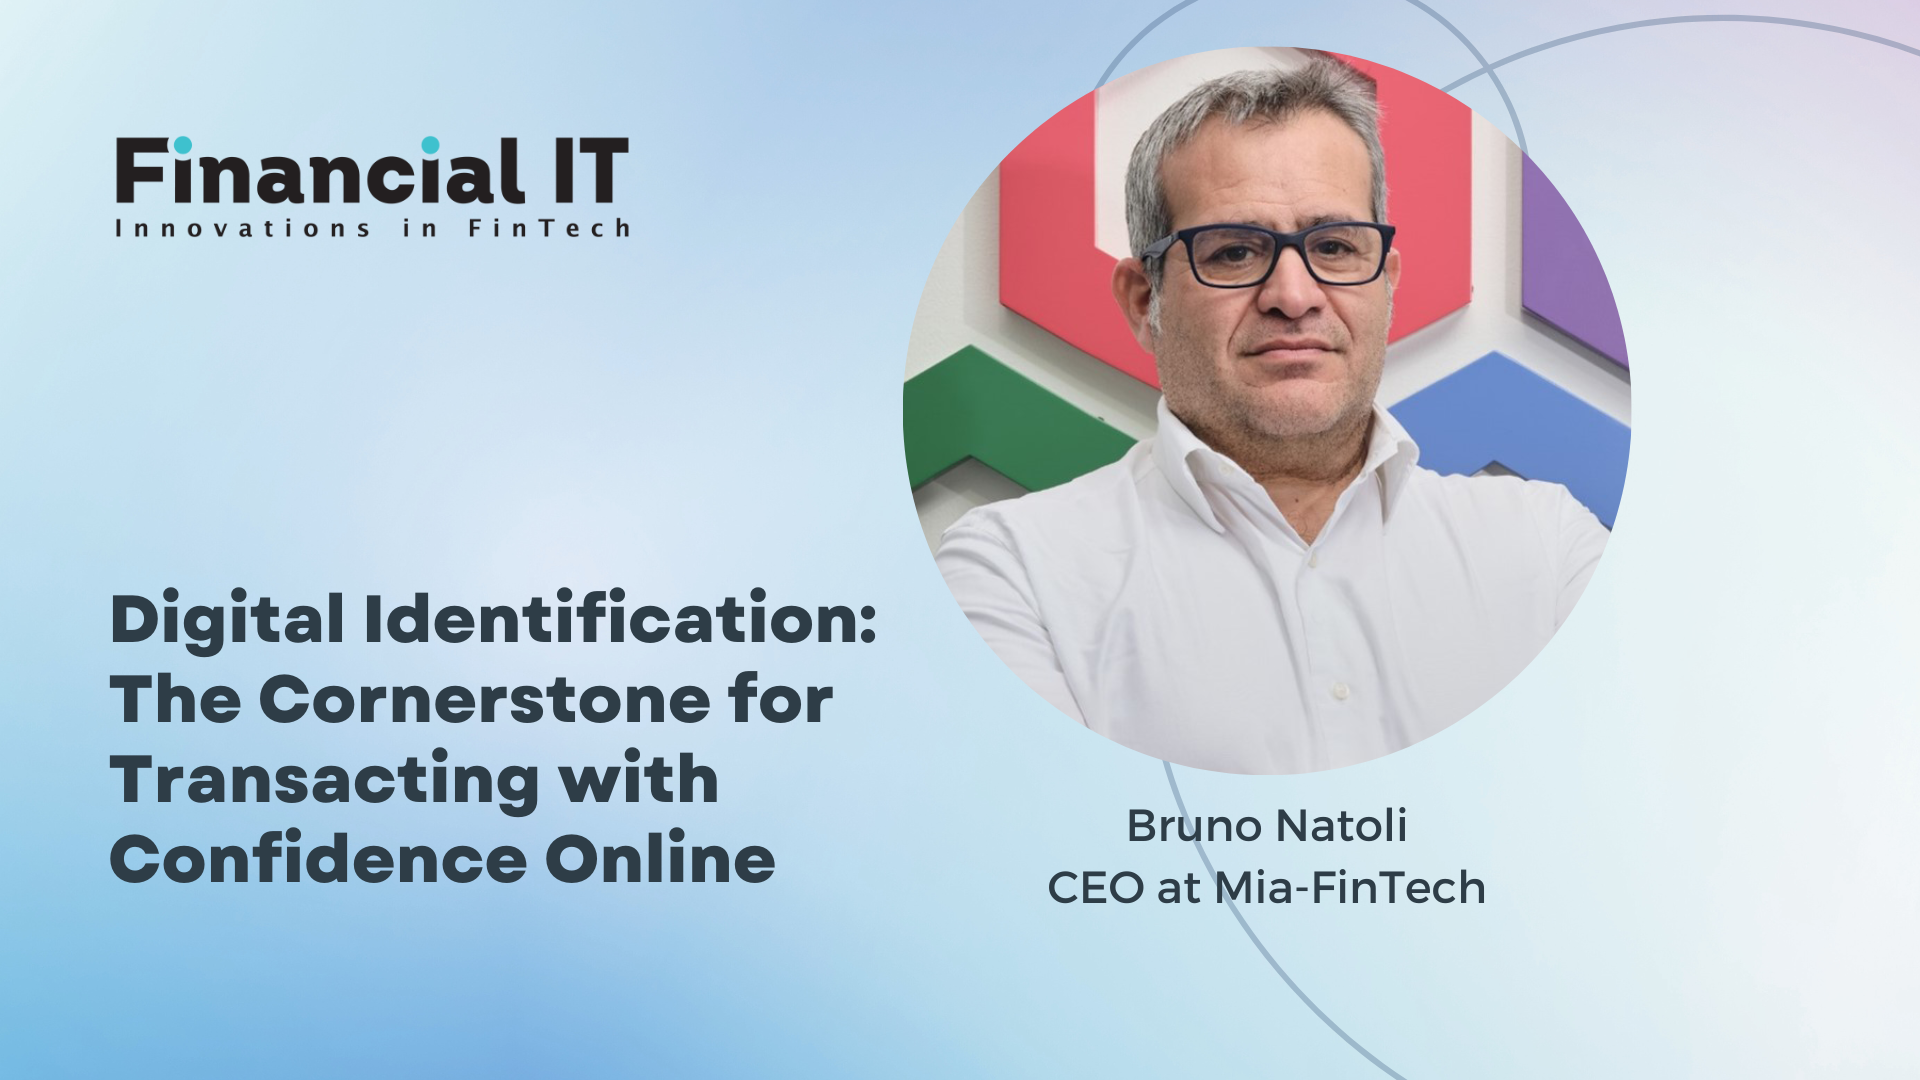 Digital Identification: The Cornerstone for Transacting with Confidence Online